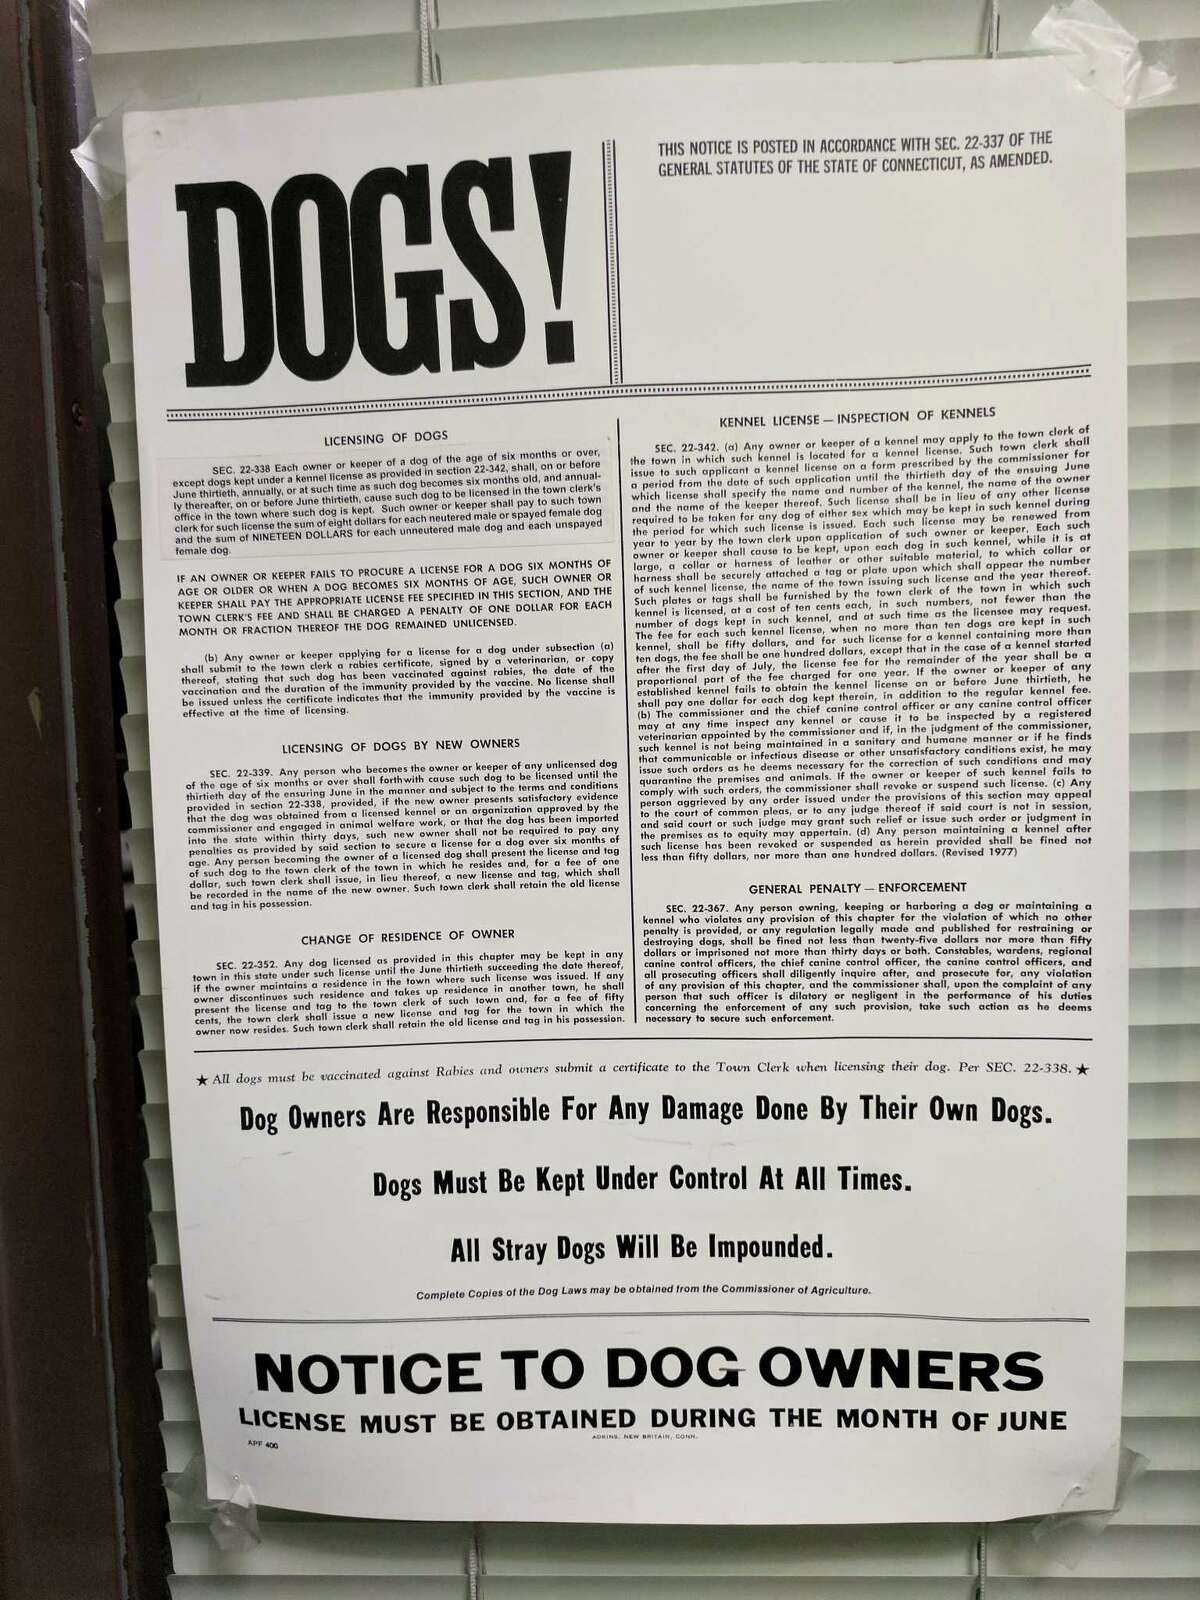 At Greenwich Town Hall, the Connecticut General Statutes regarding dog ownership and licensing are posted on a door across from the women’s restroom on the first floor.